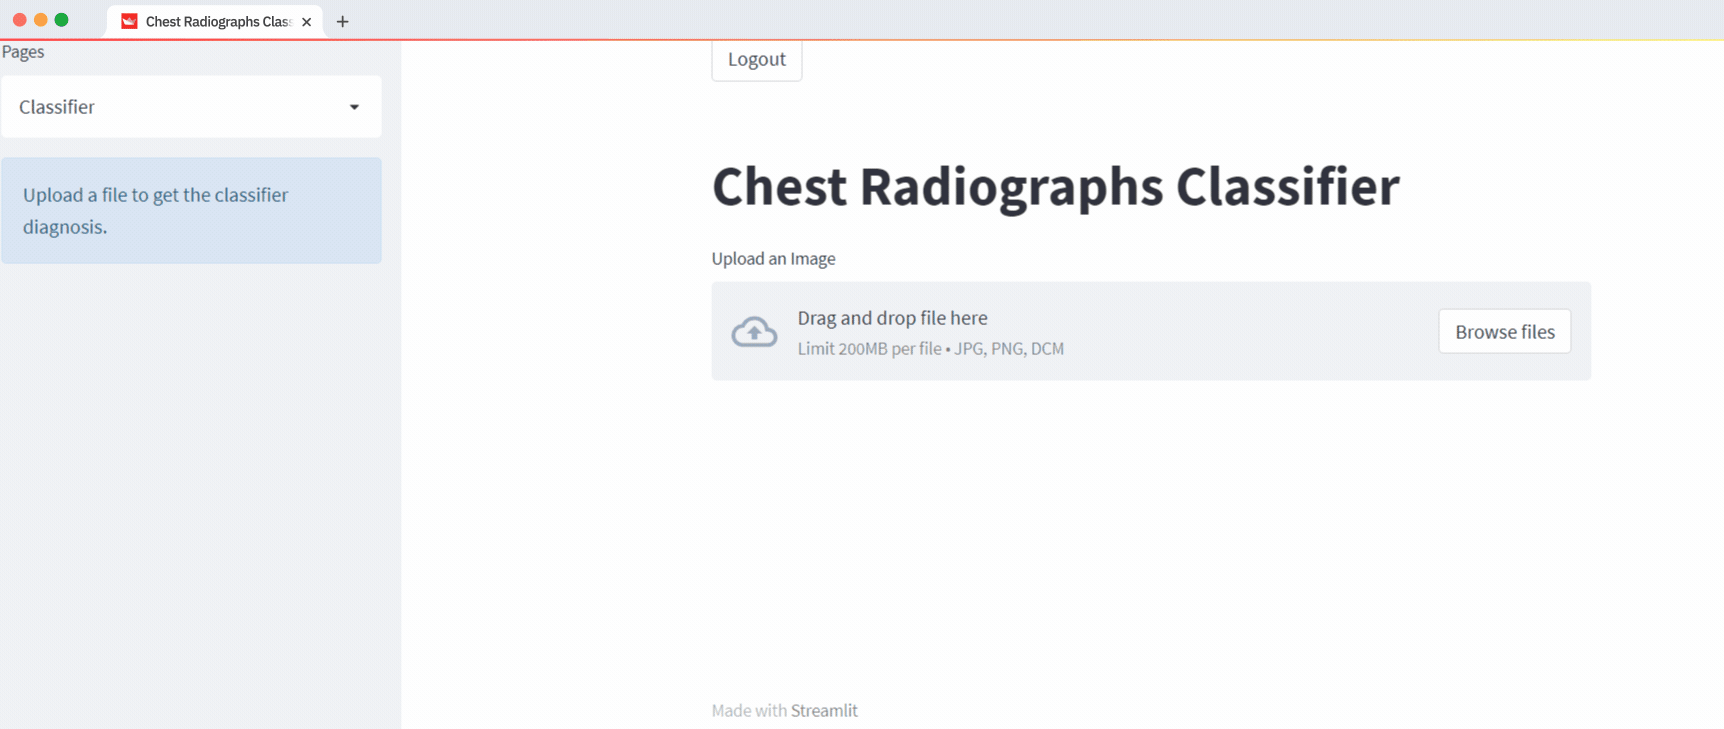 Chest-Radiographs-Classifier-GIF